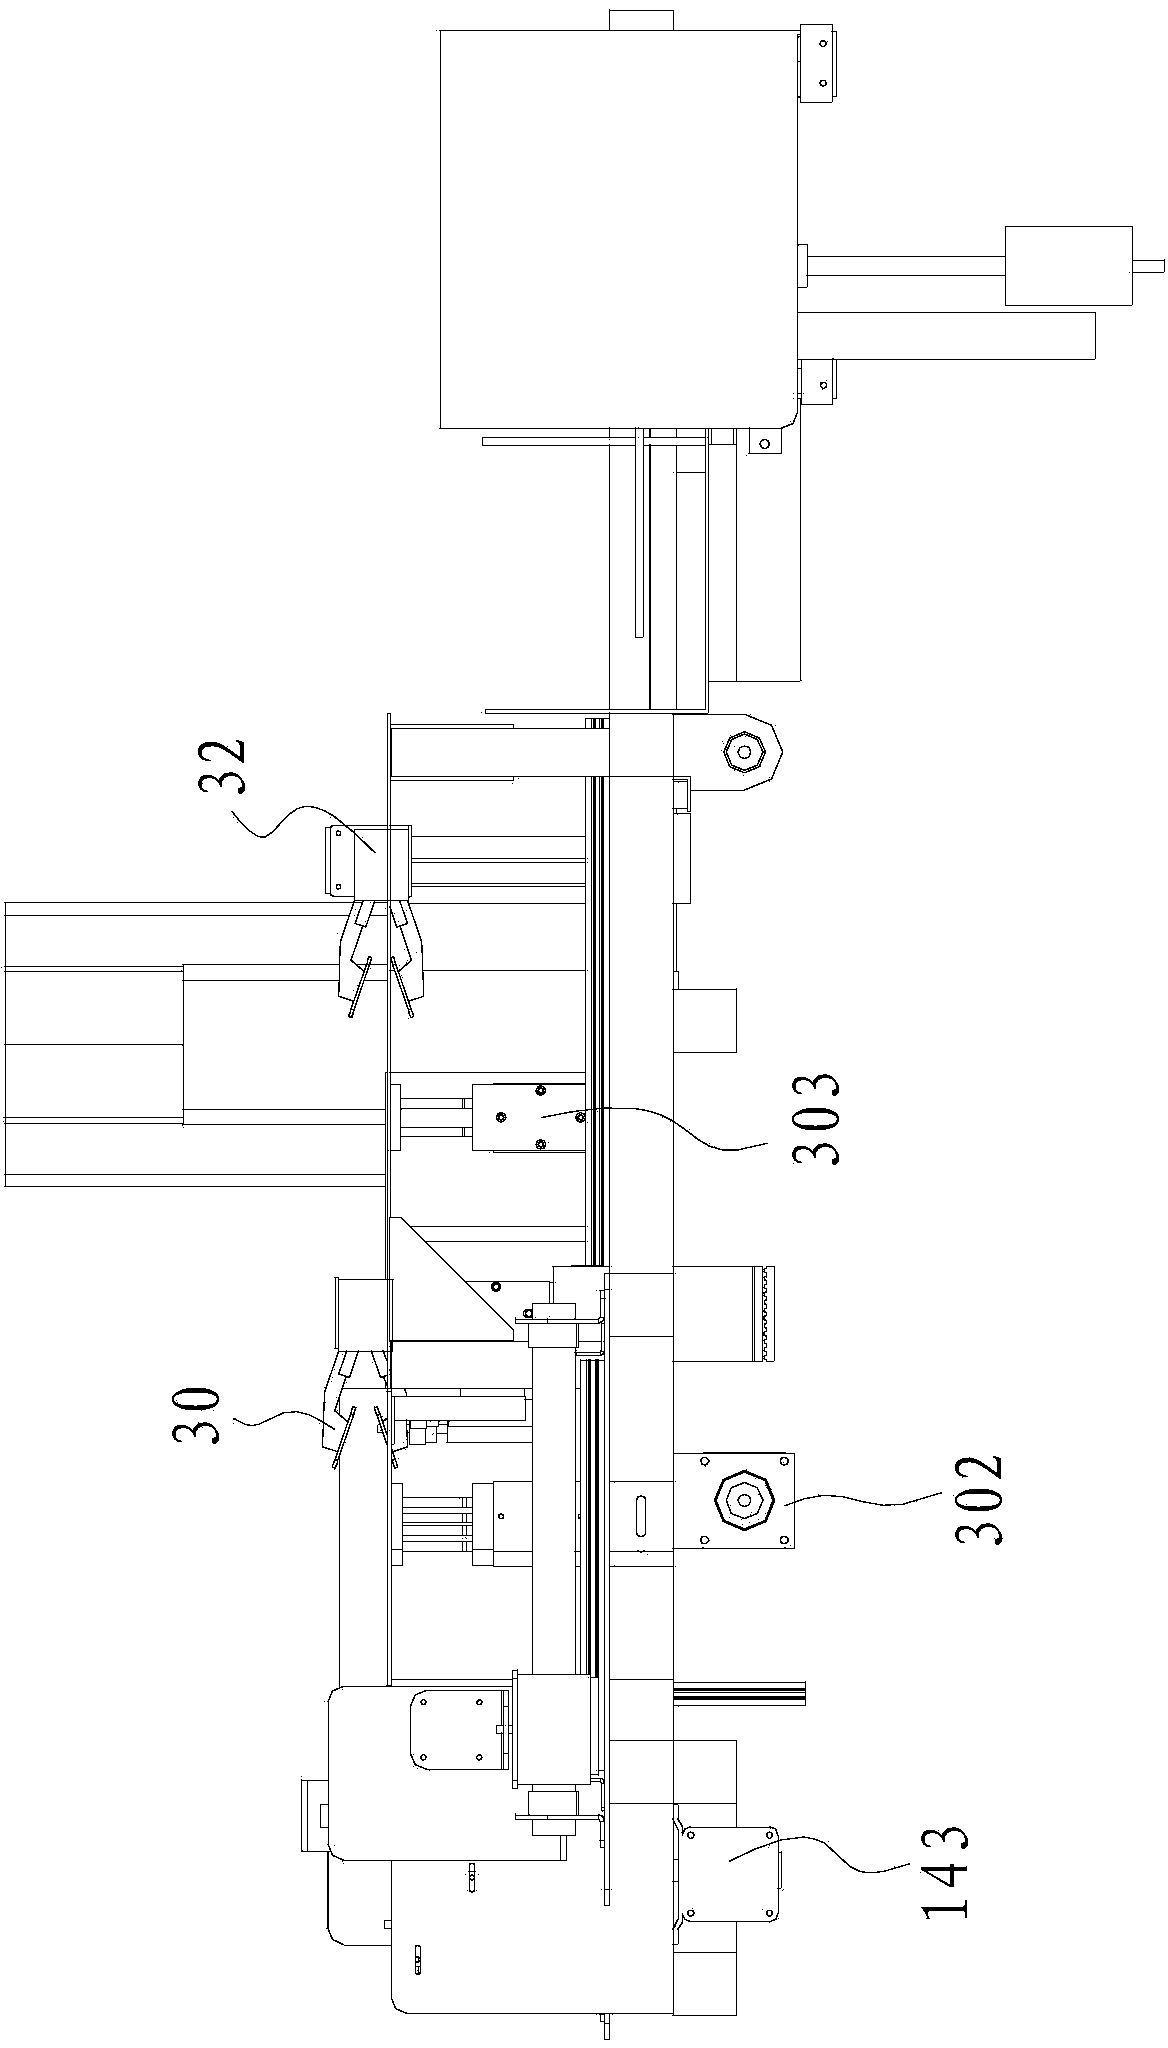 Sewing feeding and discharging assisting device